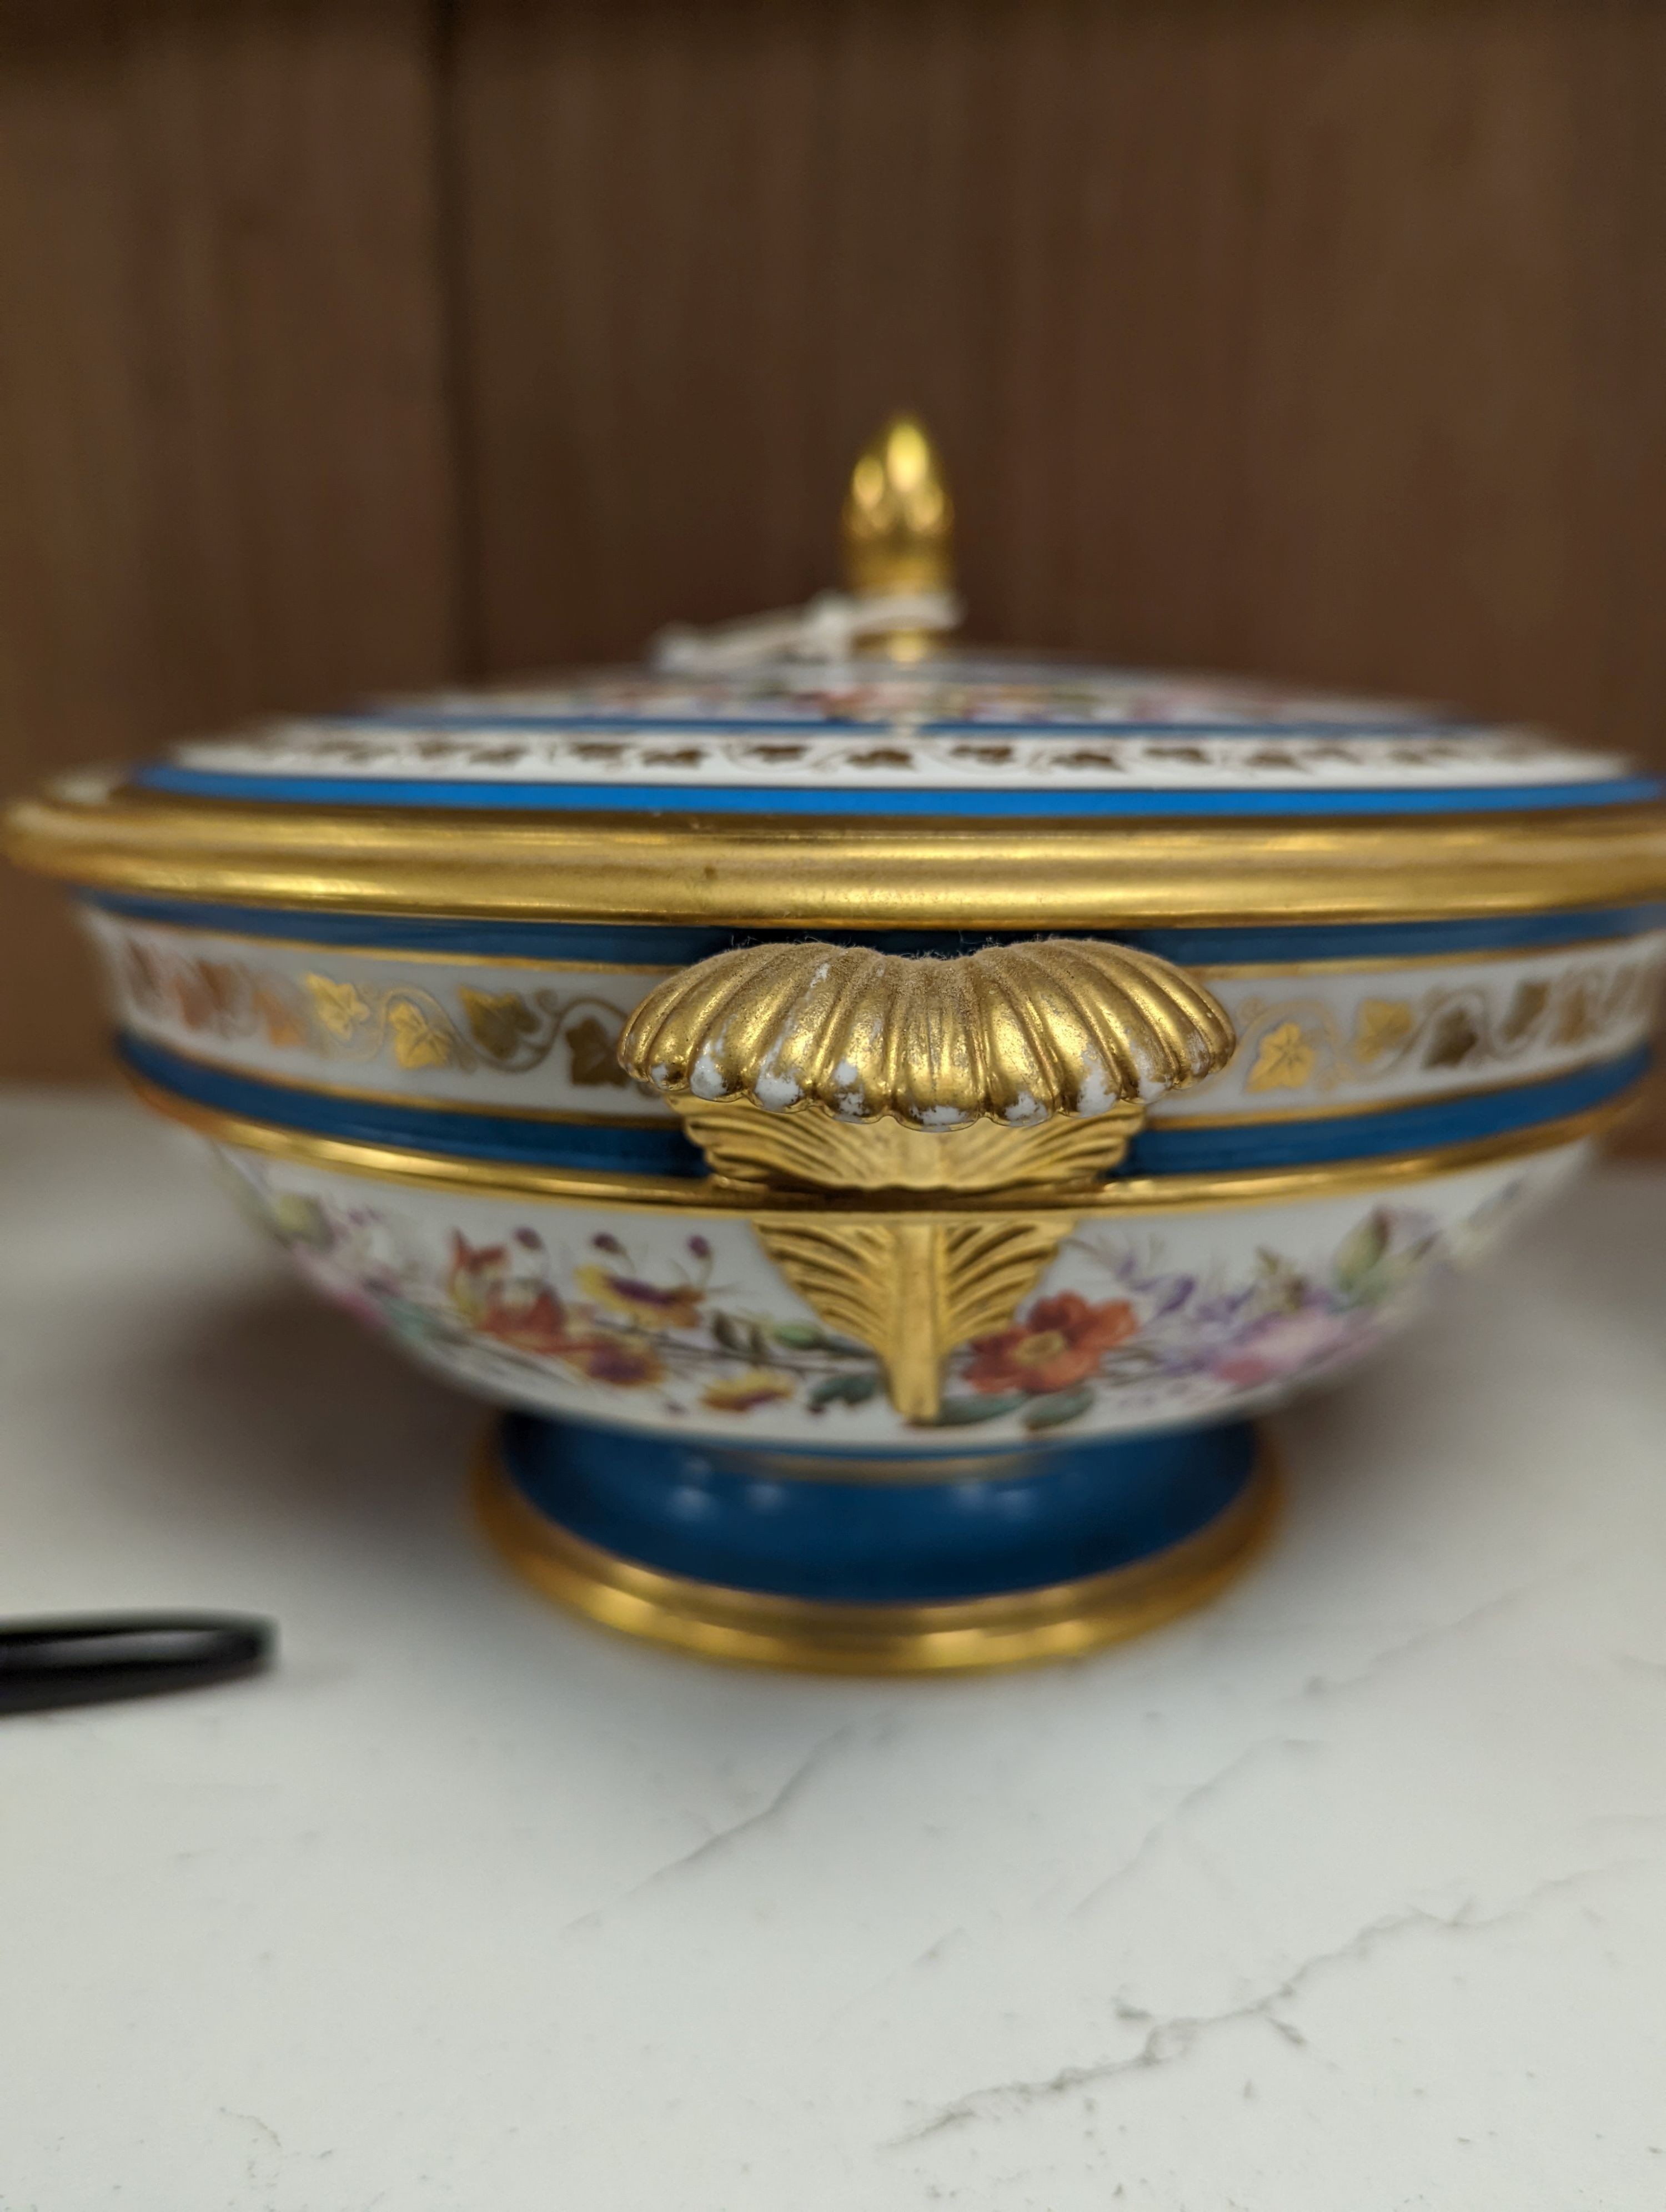 Sevres ecuelle and cover painted with a band of flowers surrounding the gilt monogram of Louis Phillipe, blue mark dated 1850, red mark for Chateau de Compiegne 25cm